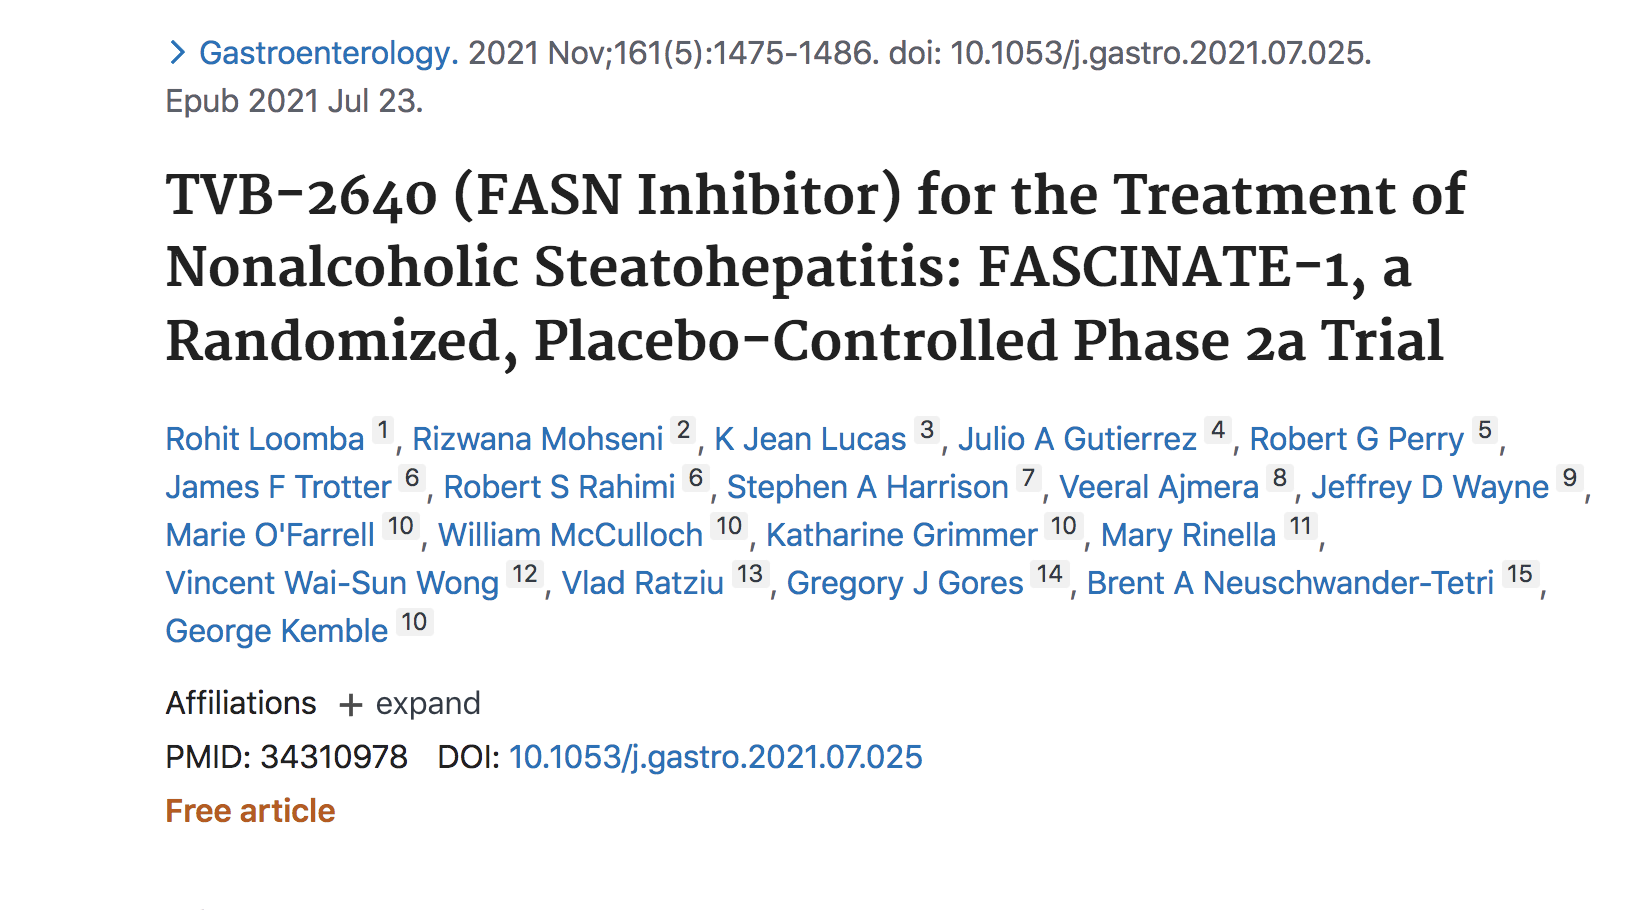 image of TVB-2640 (FASN inhibitor) for the treatment of nonalcoholic steatohepatitis: FASCINATE-1, a randomized, placebo-controlled Ph2a trial.